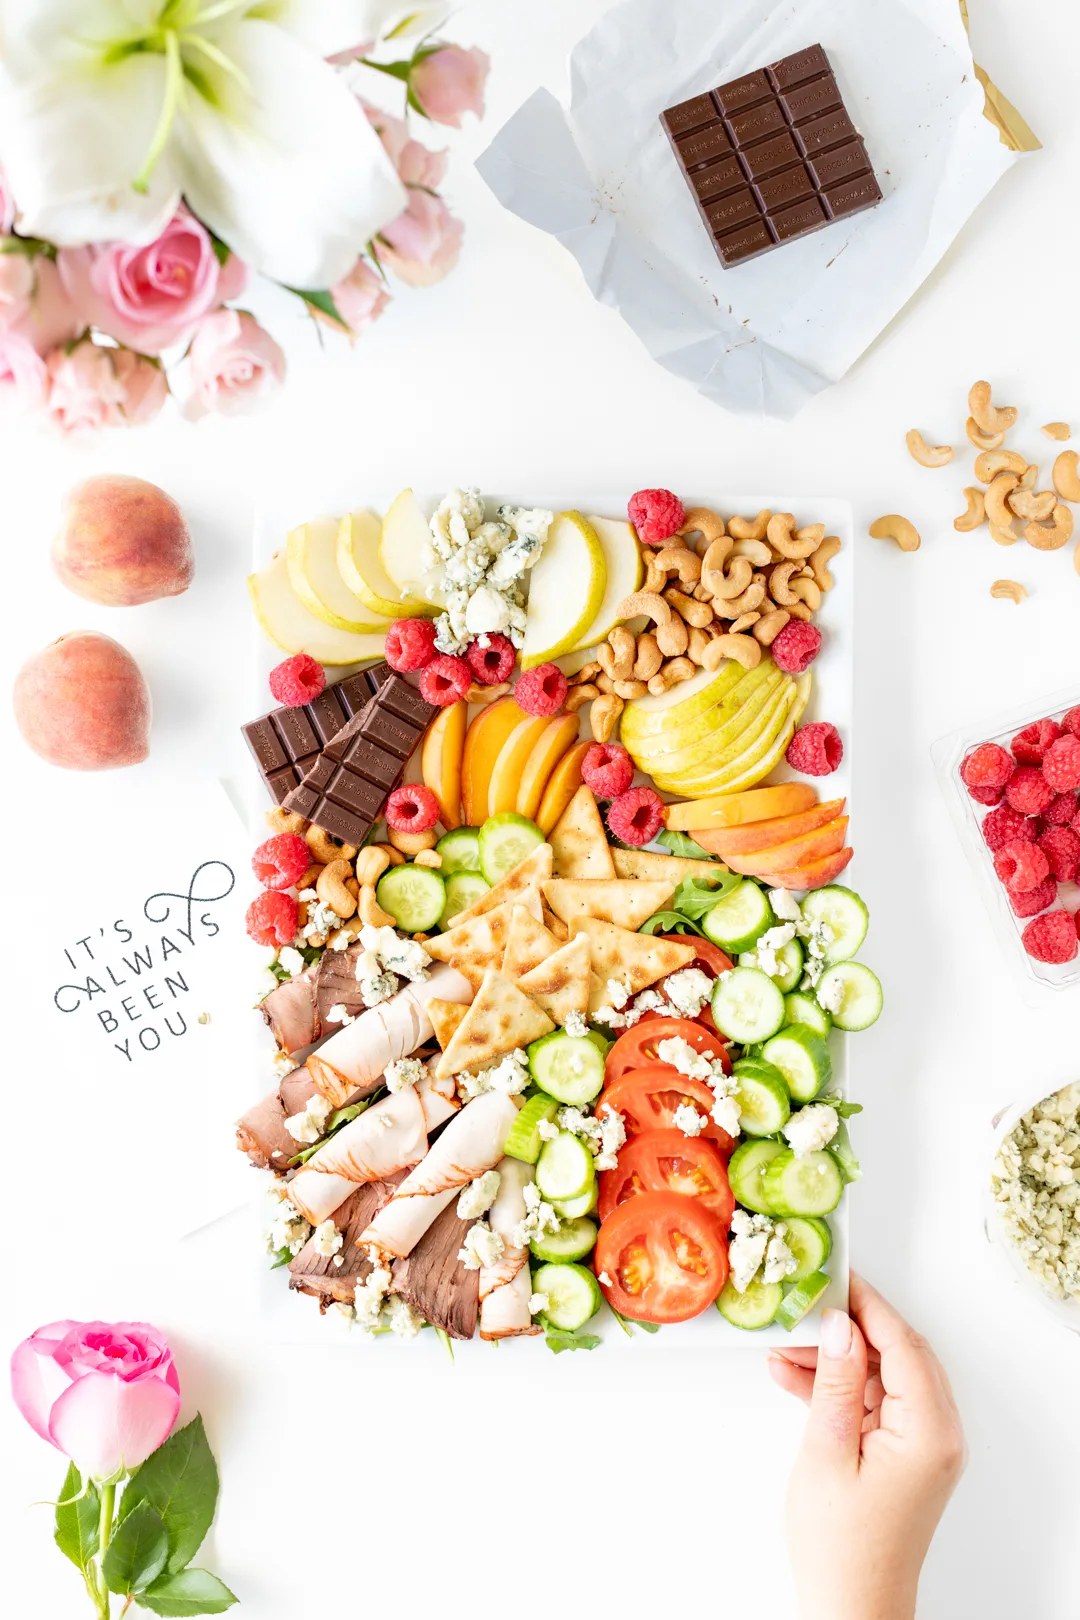 snack tray with fresh chopped vegetables, fruits, meats and cheeses.